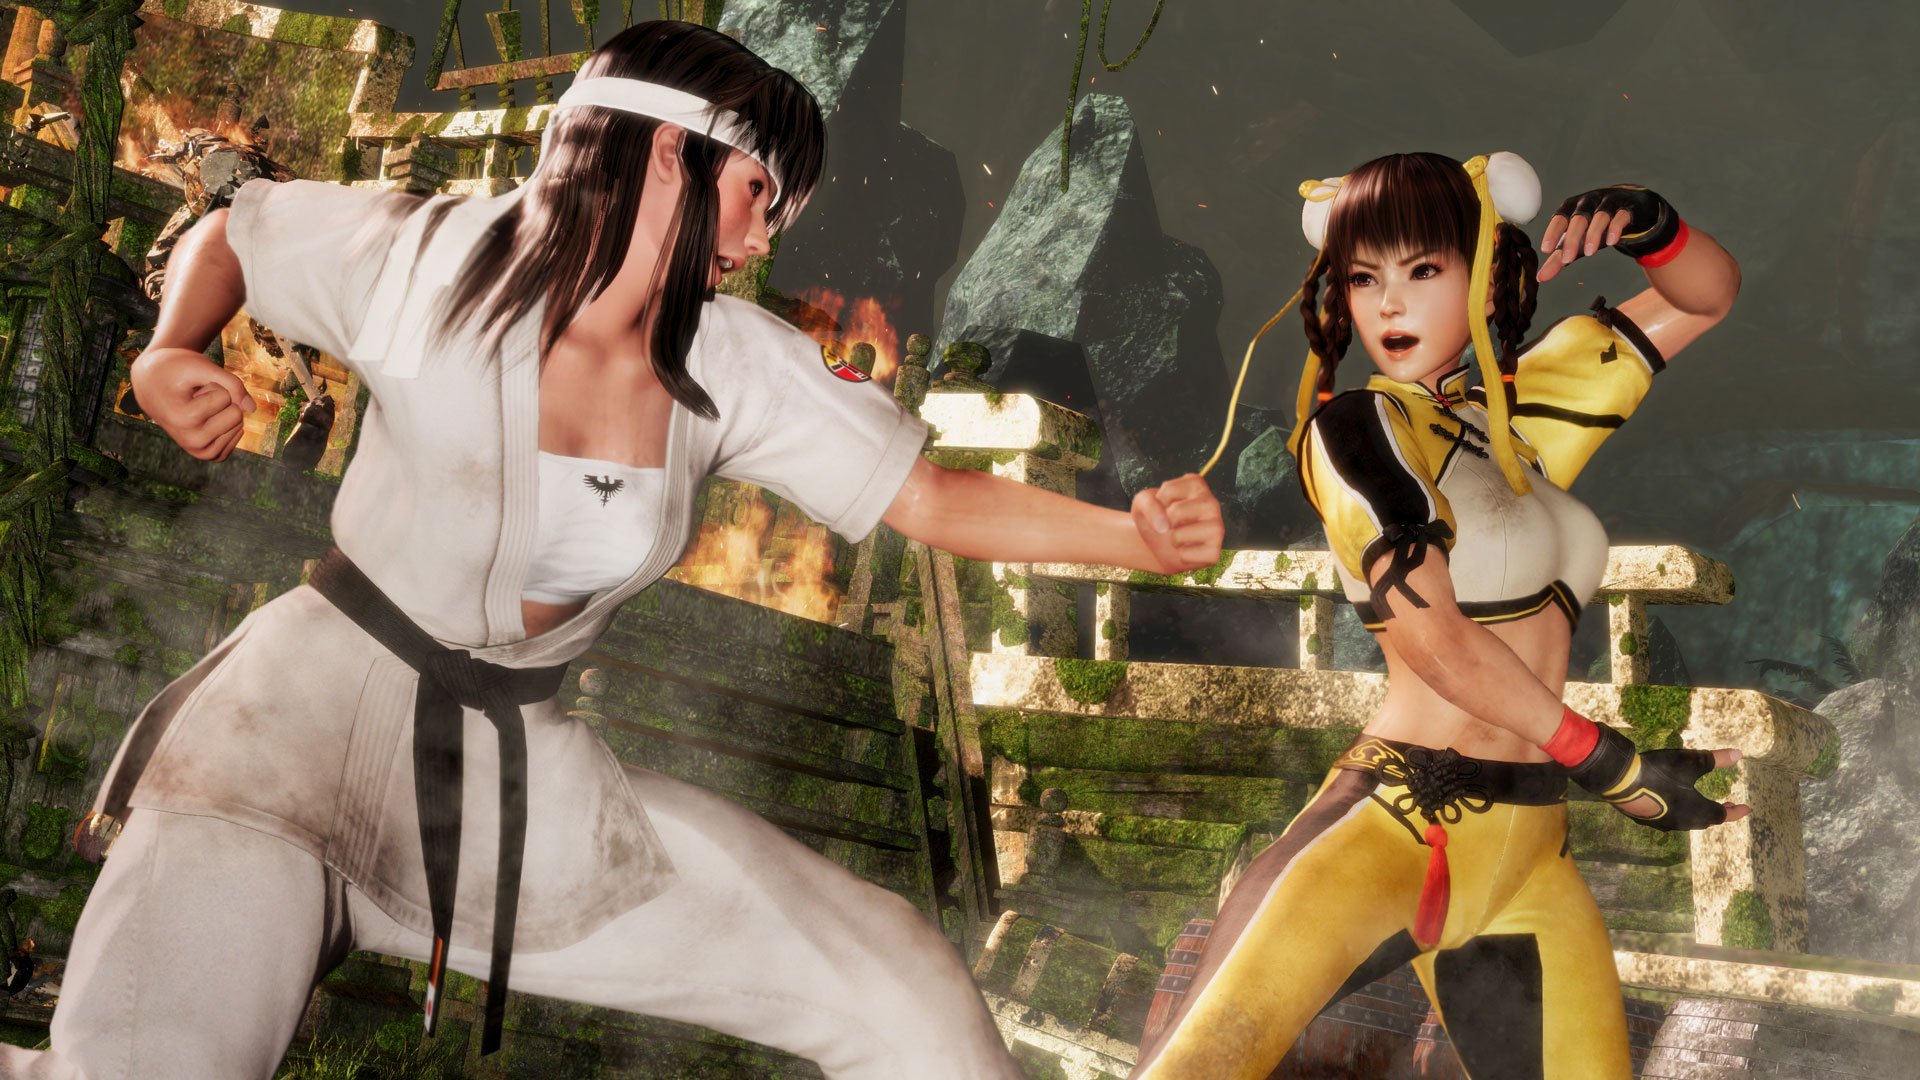 Dead or Alive 6 Can't Shed Hyper-Sexualisation Or Fans Will Leave